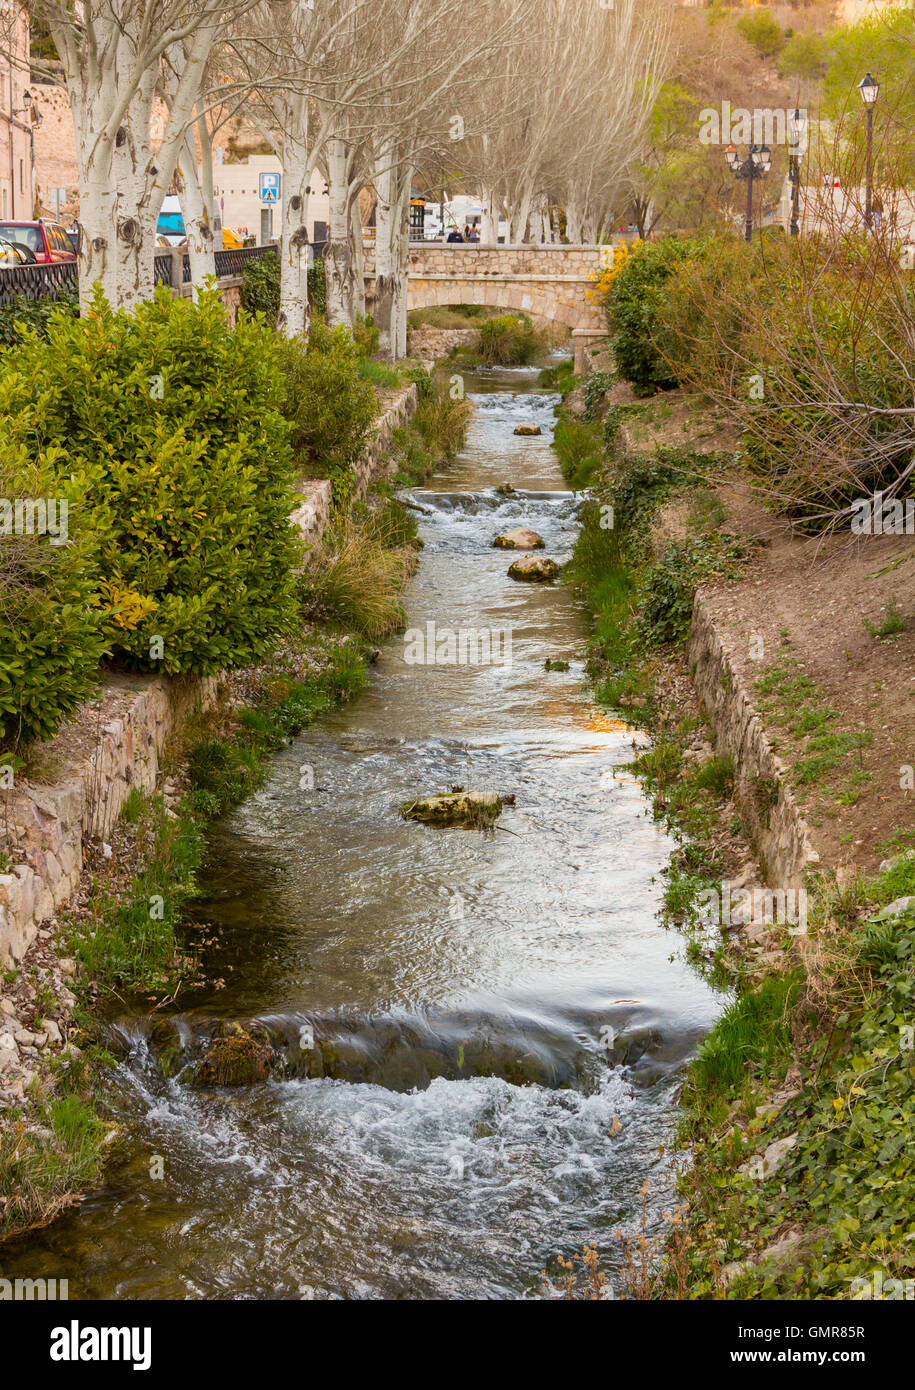 Small water canal crosses the city of Cuenca, Spain Stock Photo